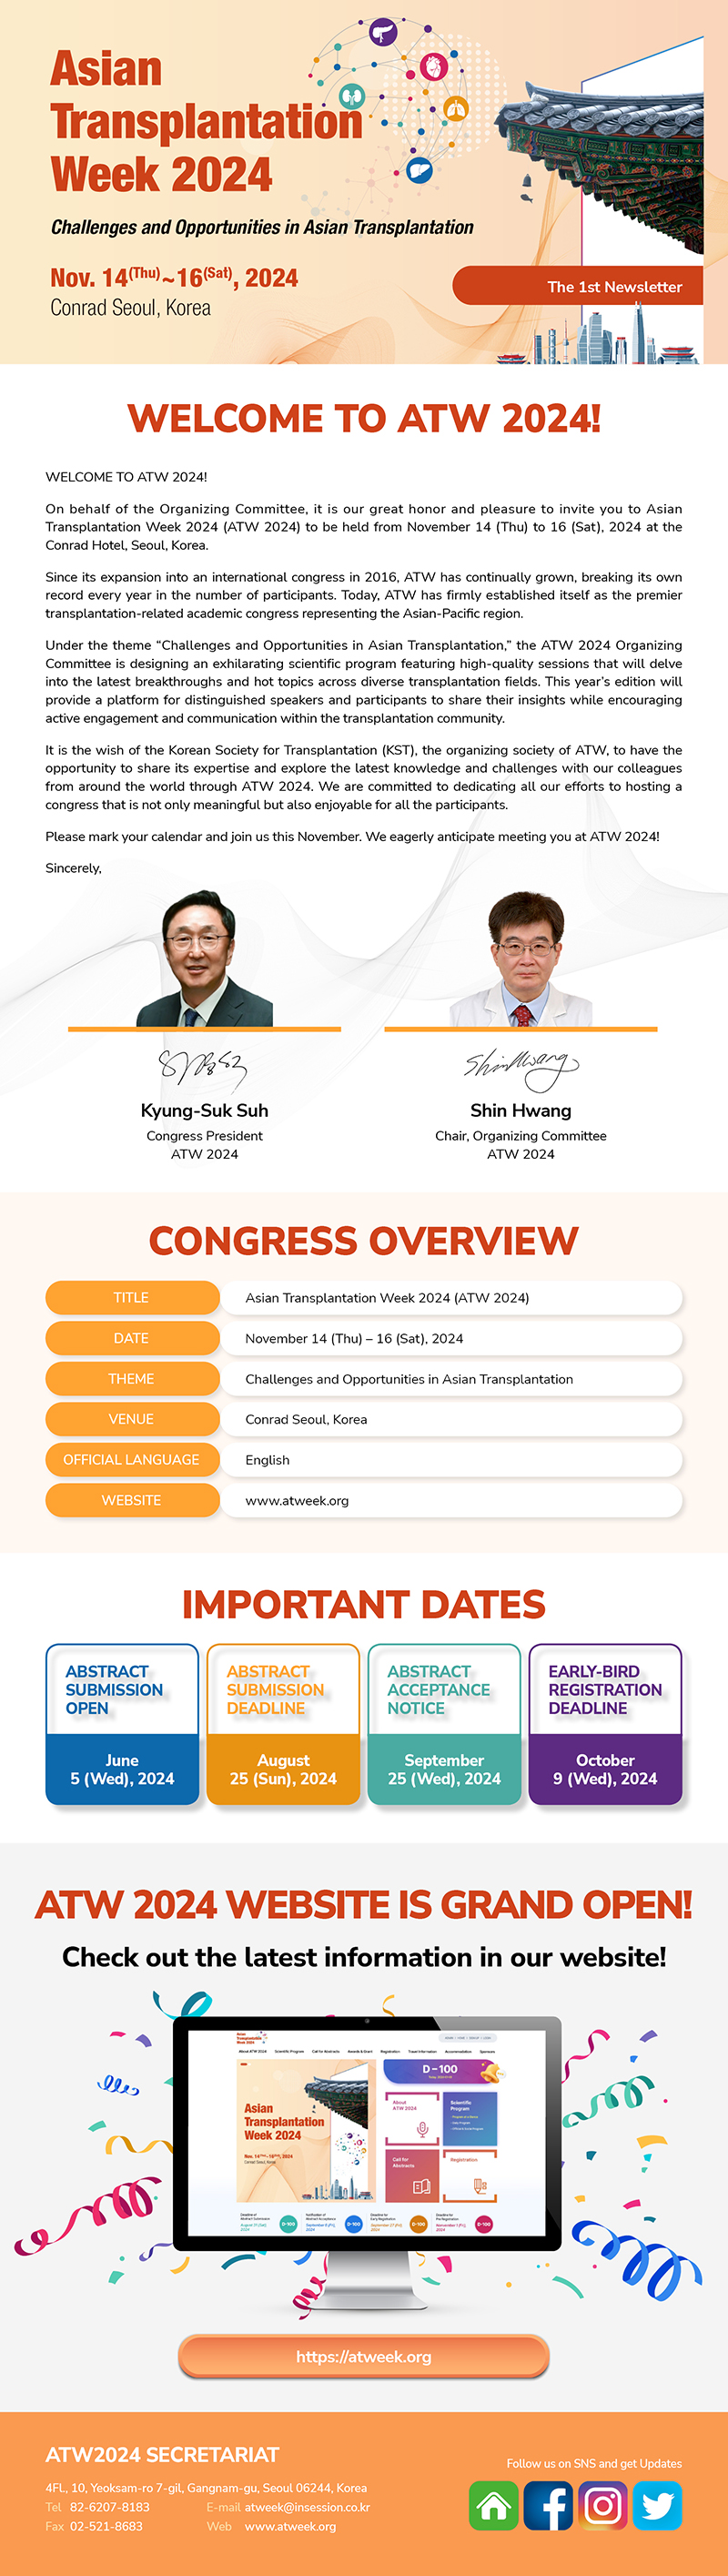 [1st Newsletter] Invite You to ATW 2024!